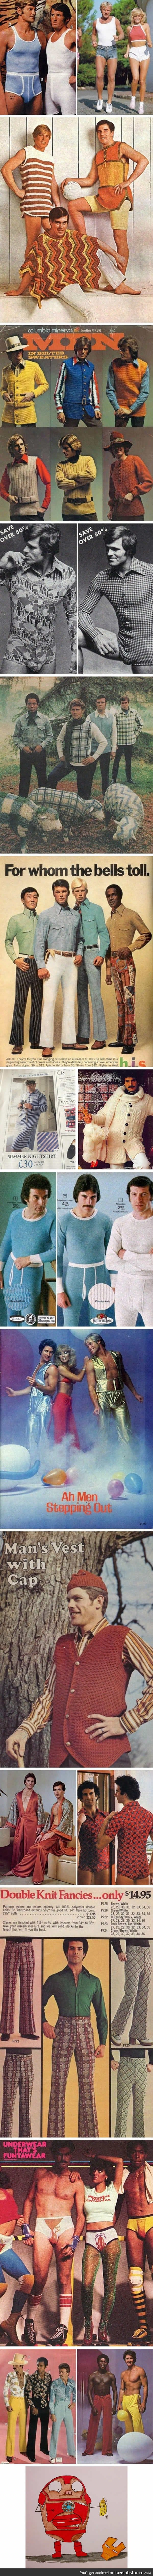 Men's fashion in the 1970s was a lawless wasteland